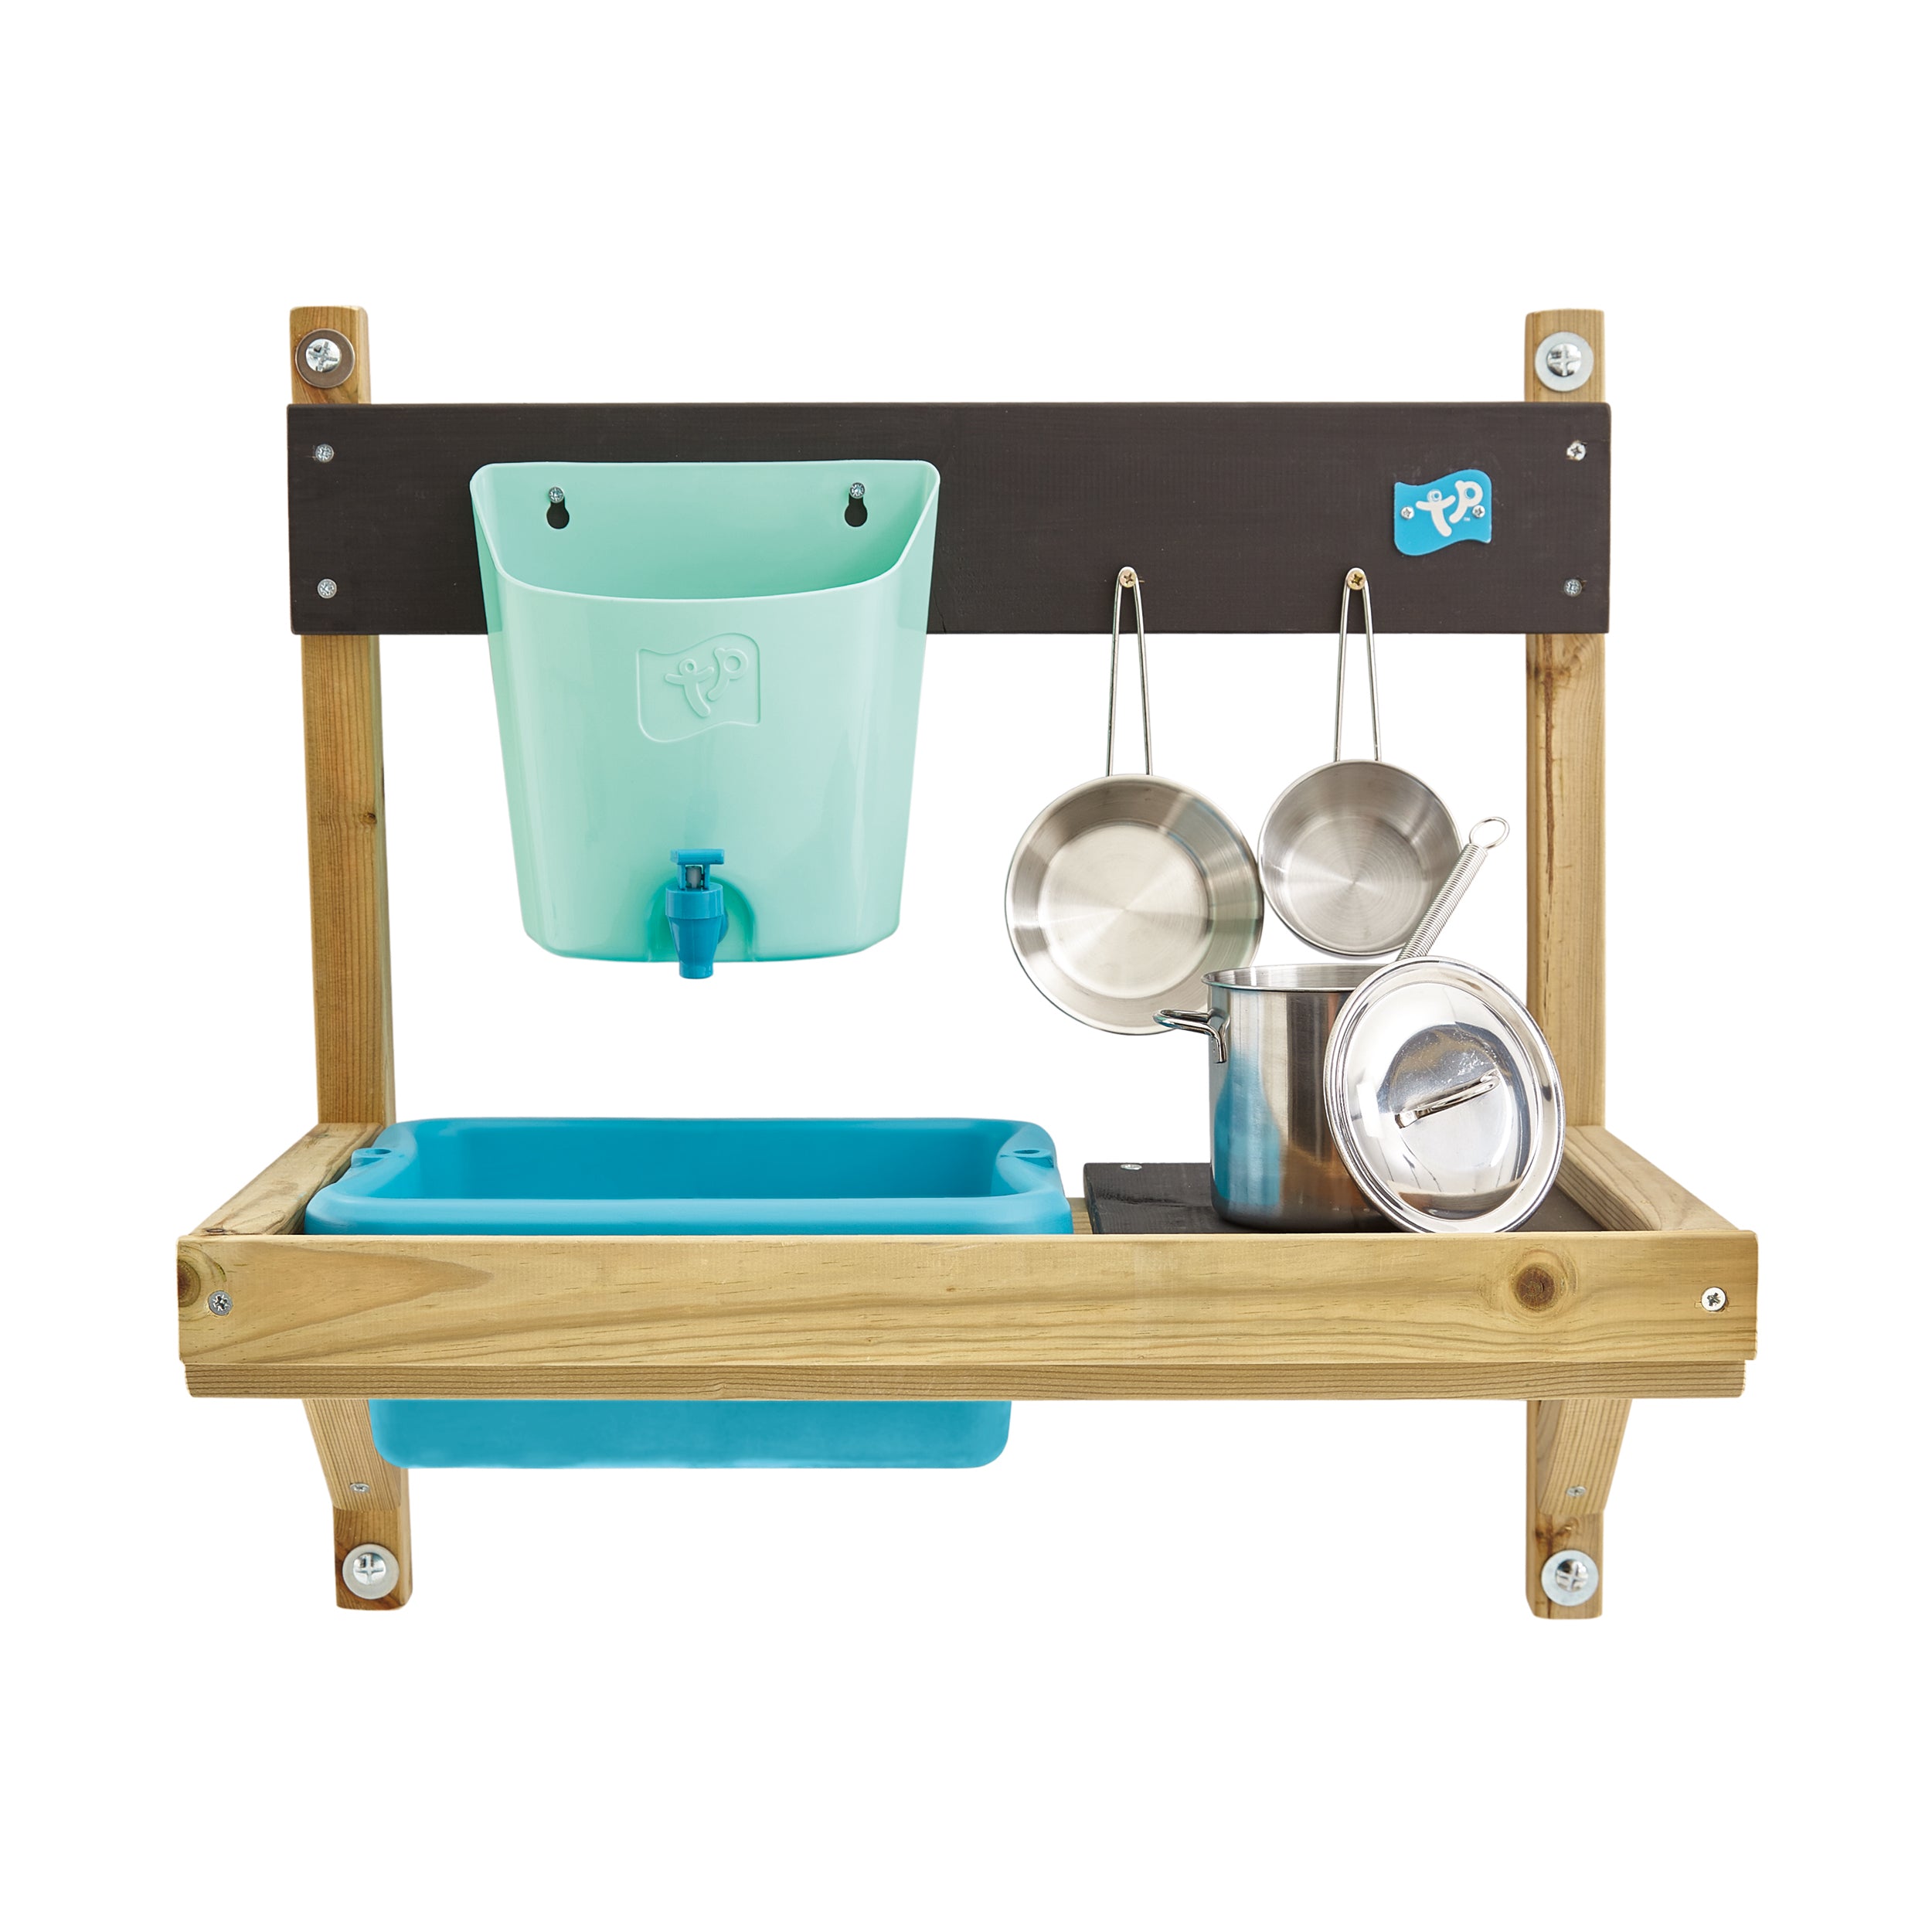 TP295 Early Fun Mud Kitchen Playhouse Accessory